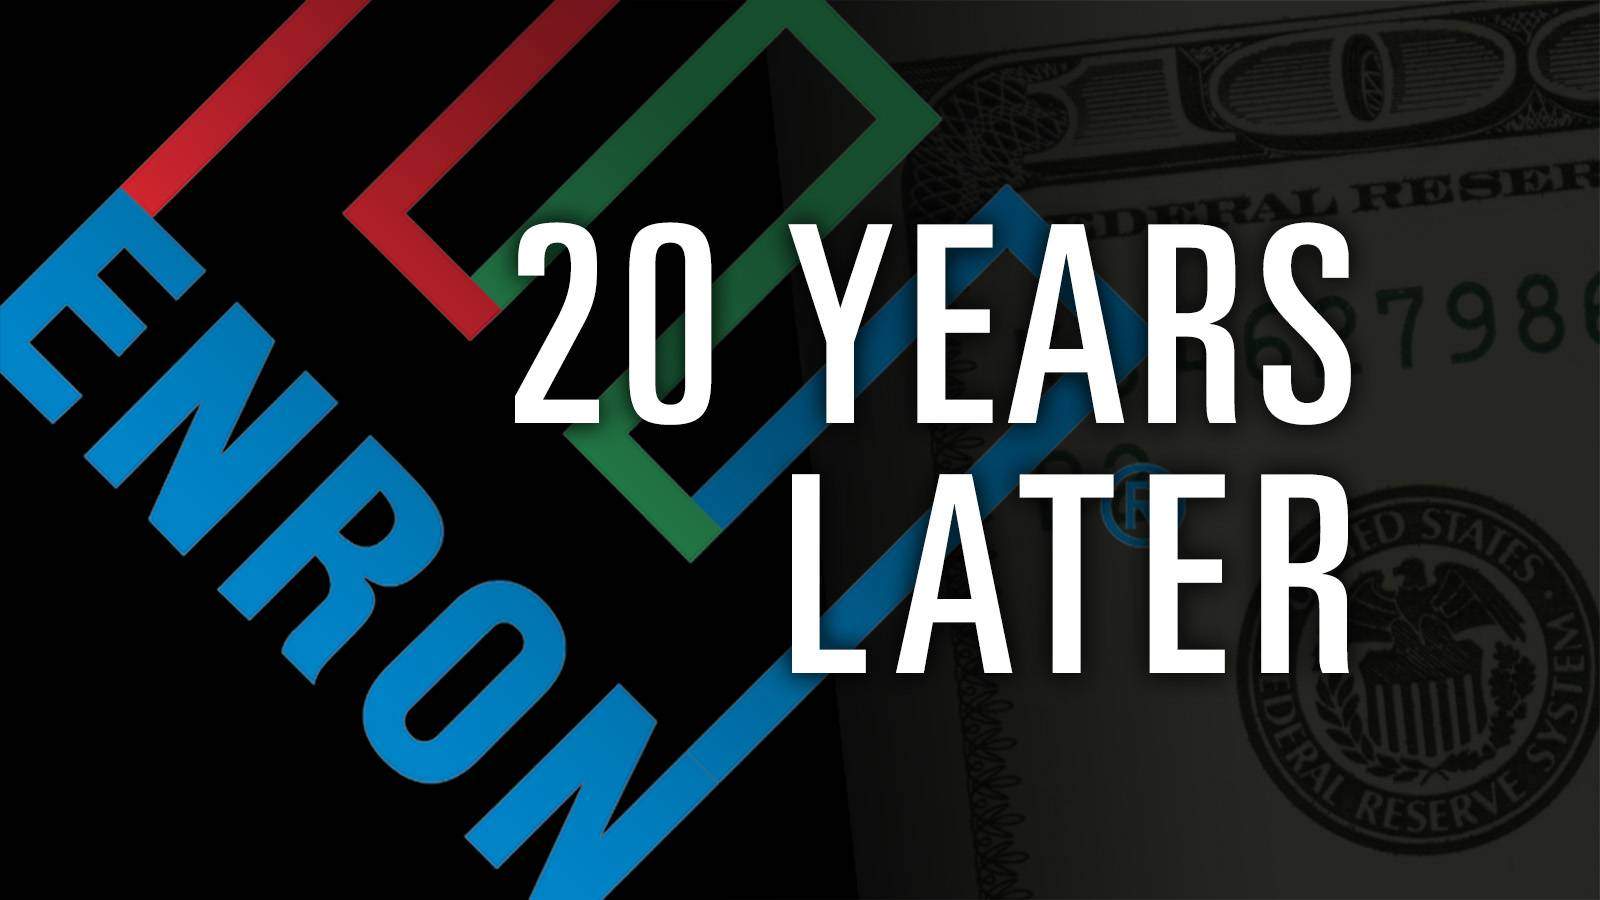 Black graphic with blue/red/green Enron logo and text: "20 Years Later"